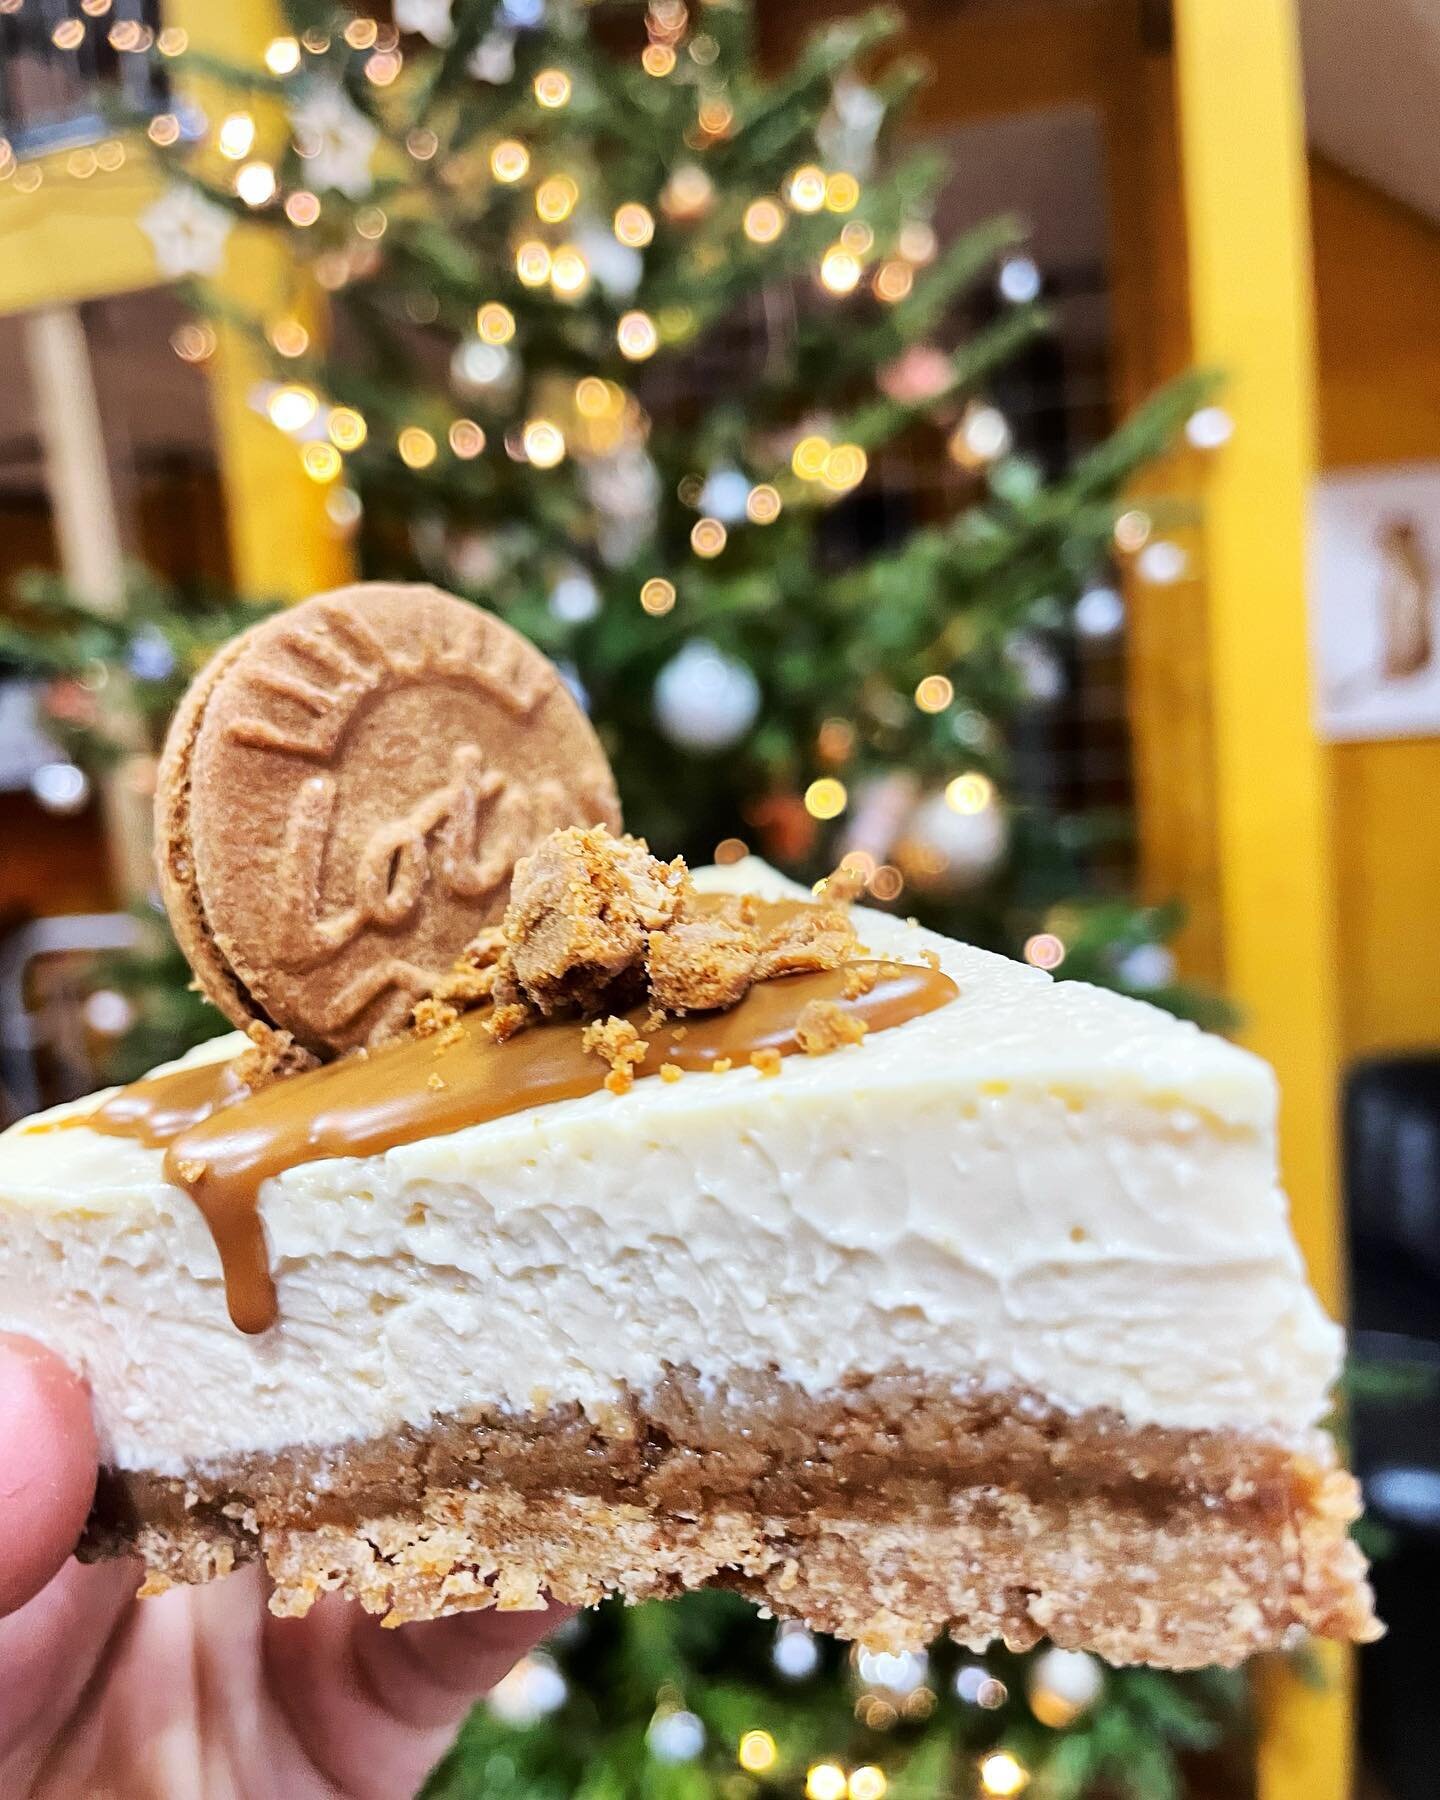 Baked Lotus Cheesecake 💛
&bull;
Eisssh It Was Gone Before We Could Post it! Abby from the Bakery[ @theorchardbakeryco pulling out the stops to bring you these banging baked goods🎄
&bull;
Lots on the counter today so do pop up, we&rsquo;re open till